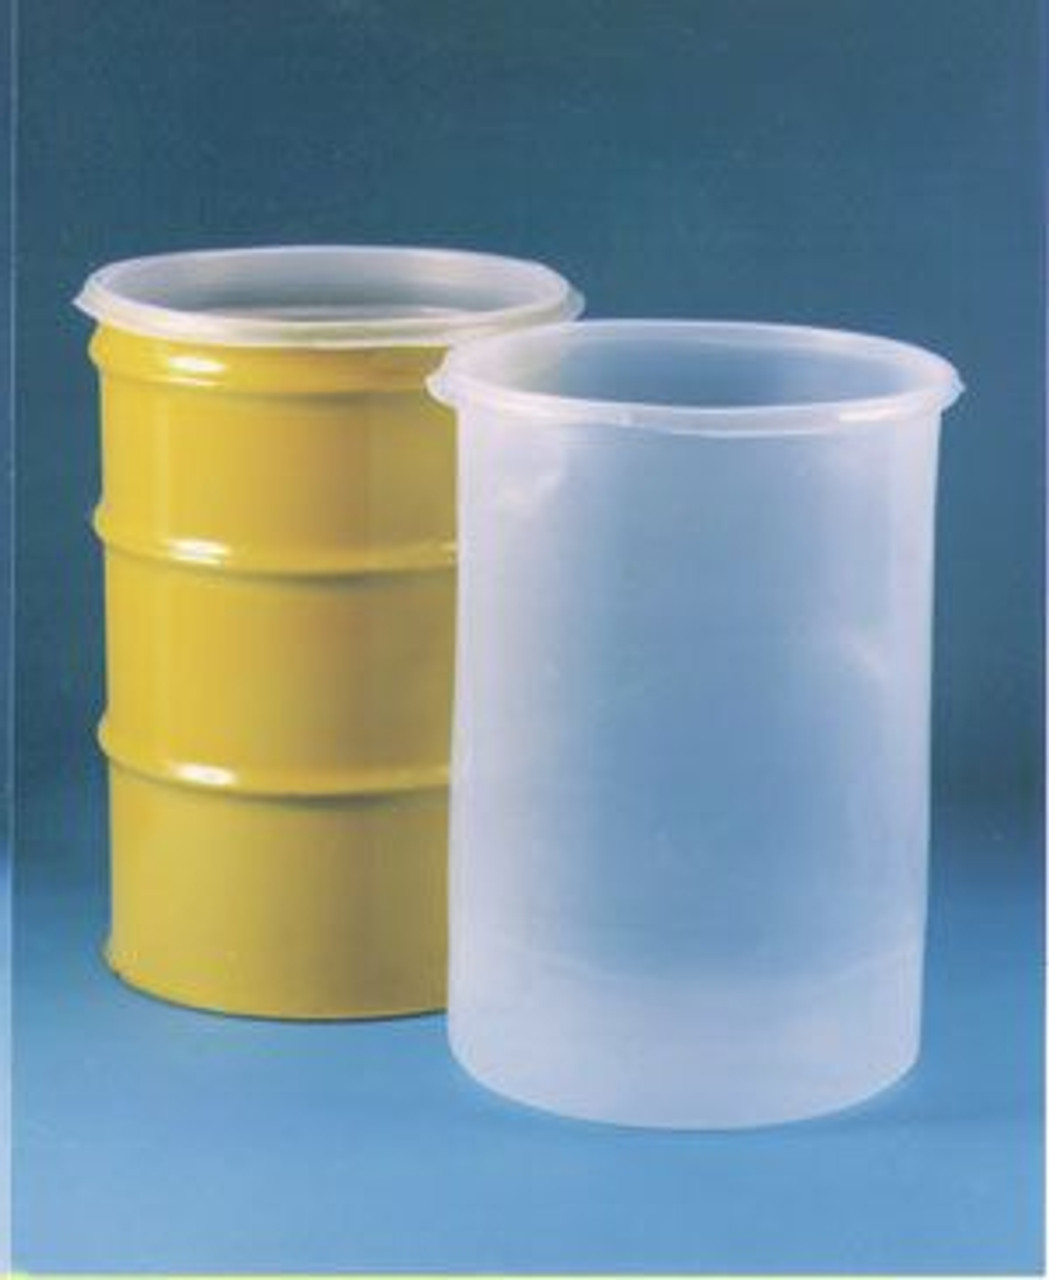 30 GALLON 15 MIL LDPE STRAIGHT SIDED SEAMLESS DRUM LINER